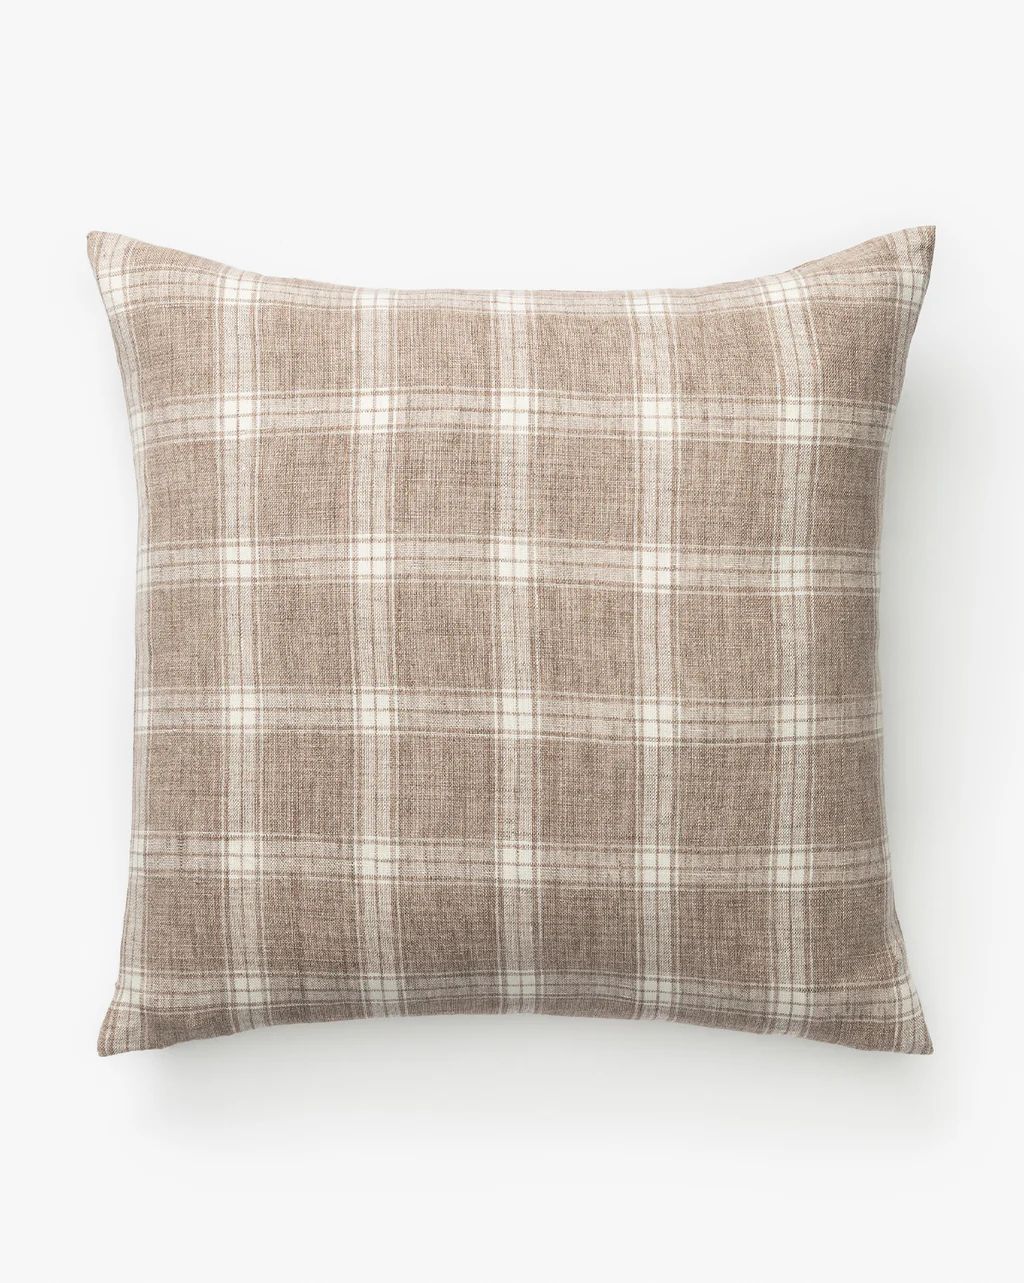 Tannehill Pillow Cover | McGee & Co. (US)